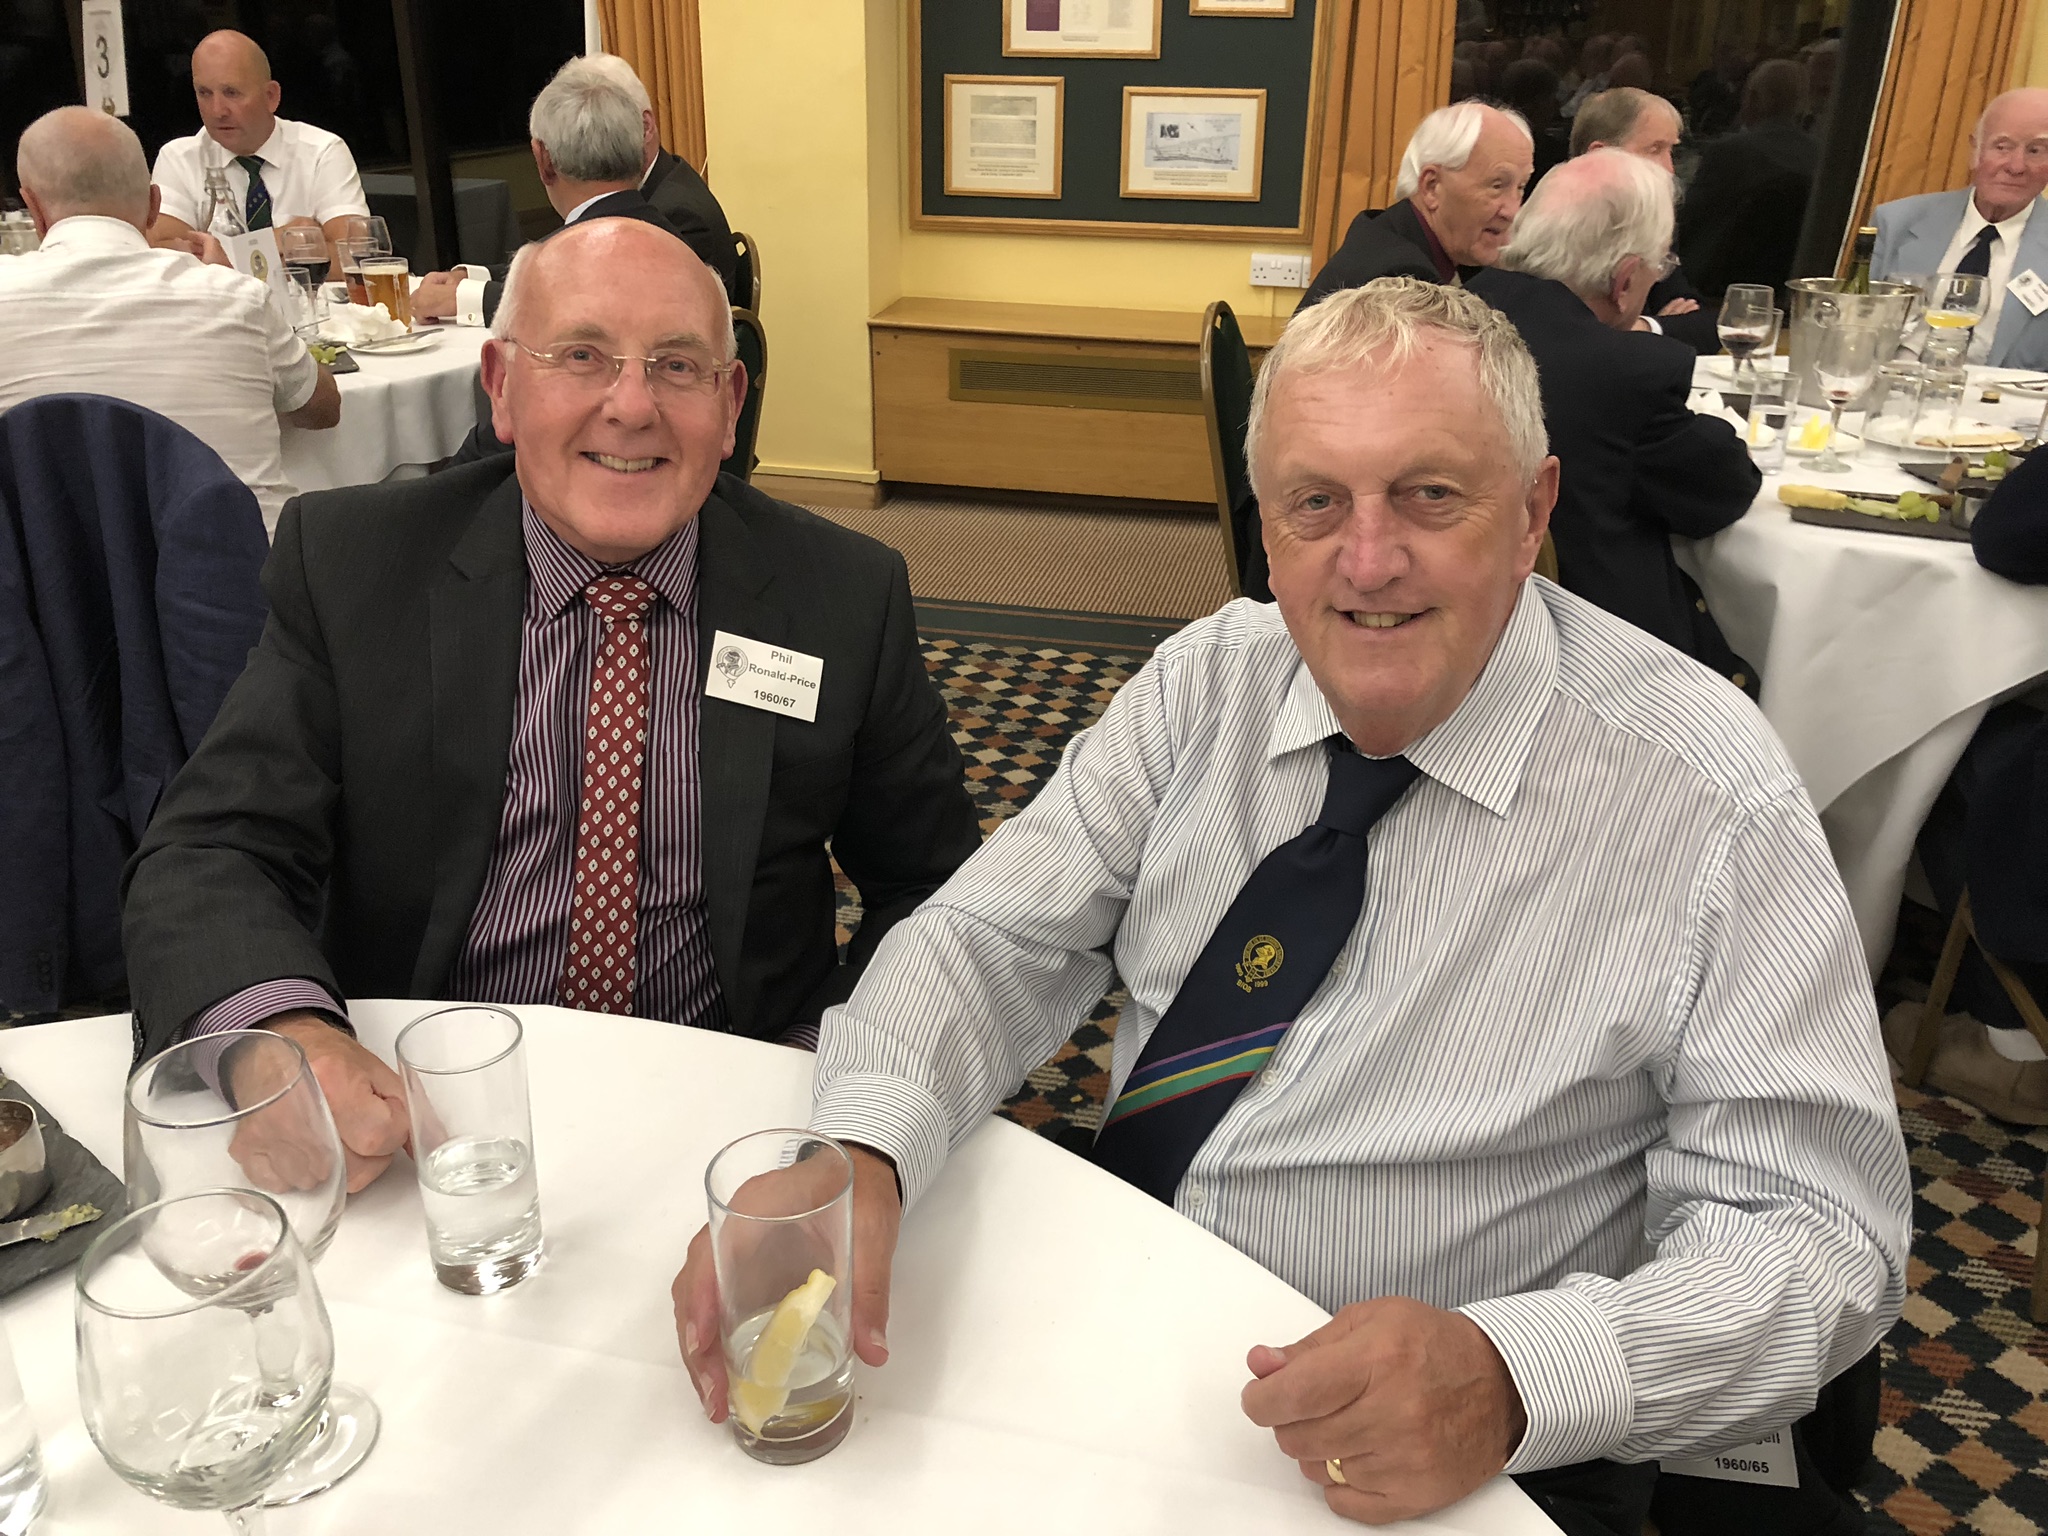 Photograph of Philip Ronald-Price (1960/67) at Reunion Dinner 2019